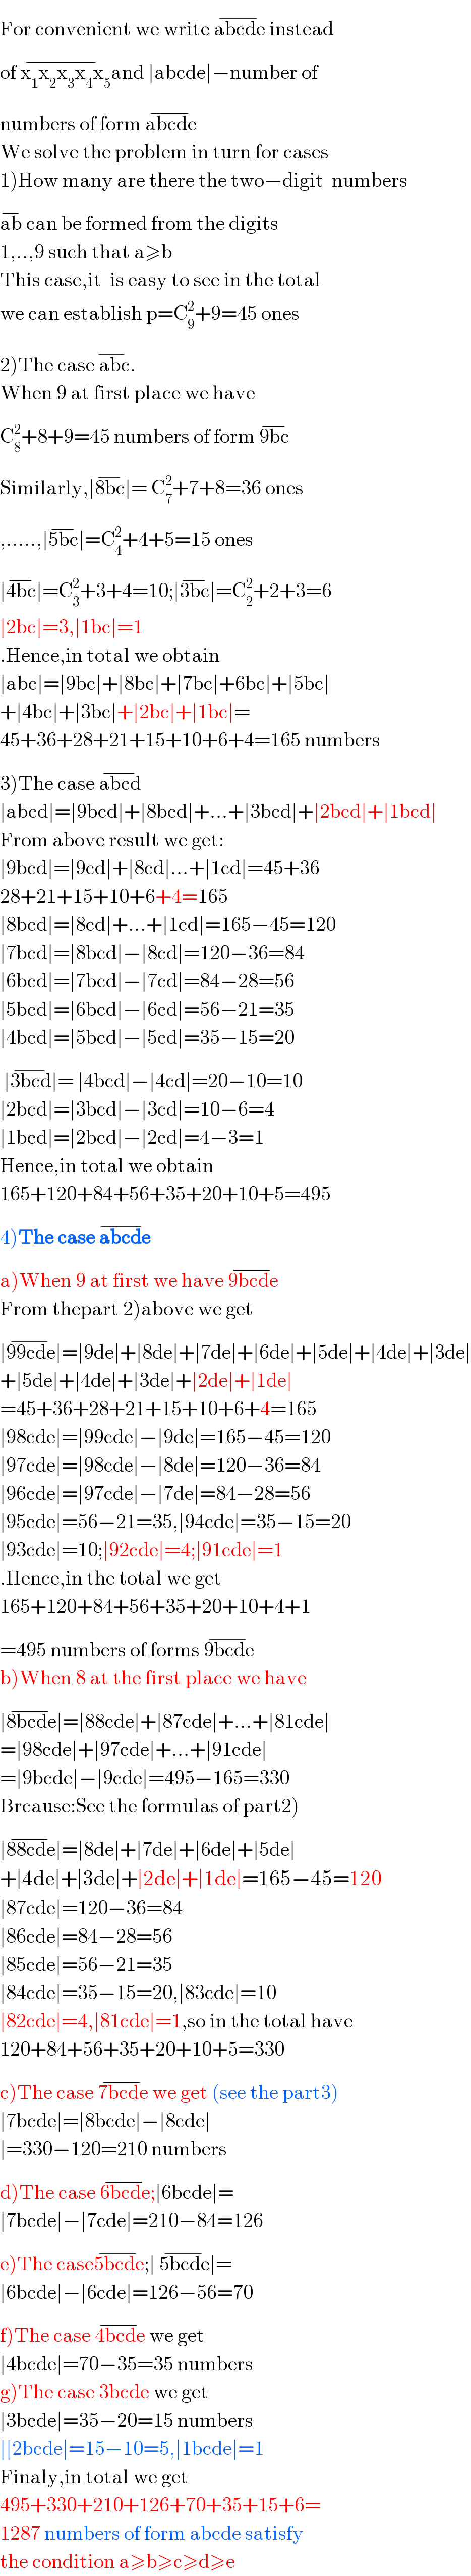 For convenient we write abcde^(−)  instead  of x_1 x_2 x_3 x_4 x_5 ^(−) and ∣abcde∣−number of  numbers of form abcde^(−)   We solve the problem in turn for cases  1)How many are there the two−digit  numbers   ab^(−)  can be formed from the digits  1,..,9 such that a≥b  This case,it  is easy to see in the total  we can establish p=C_9 ^2 +9=45 ones  2)The case abc^(−) .  When 9 at first place we have  C_8 ^2 +8+9=45 numbers of form 9bc^(−)   Similarly,∣8bc^(−) ∣= C_7 ^2 +7+8=36 ones  ,.....,∣5bc^(−) ∣=C_4 ^2 +4+5=15 ones  ∣4bc^(−) ∣=C_3 ^2 +3+4=10;∣3bc^(−) ∣=C_2 ^2 +2+3=6  ∣2bc∣=3,∣1bc∣=1  .Hence,in total we obtain  ∣abc∣=∣9bc∣+∣8bc∣+∣7bc∣+6bc∣+∣5bc∣  +∣4bc∣+∣3bc∣+∣2bc∣+∣1bc∣=  45+36+28+21+15+10+6+4=165 numbers   3)The case abcd^(−)   ∣abcd∣=∣9bcd∣+∣8bcd∣+...+∣3bcd∣+∣2bcd∣+∣1bcd∣  From above result we get:  ∣9bcd∣=∣9cd∣+∣8cd∣...+∣1cd∣=45+36  28+21+15+10+6+4=165  ∣8bcd∣=∣8cd∣+...+∣1cd∣=165−45=120  ∣7bcd∣=∣8bcd∣−∣8cd∣=120−36=84  ∣6bcd∣=∣7bcd∣−∣7cd∣=84−28=56  ∣5bcd∣=∣6bcd∣−∣6cd∣=56−21=35  ∣4bcd∣=∣5bcd∣−∣5cd∣=35−15=20   ∣3bcd^(−) ∣= ∣4bcd∣−∣4cd∣=20−10=10  ∣2bcd∣=∣3bcd∣−∣3cd∣=10−6=4  ∣1bcd∣=∣2bcd∣−∣2cd∣=4−3=1  Hence,in total we obtain   165+120+84+56+35+20+10+5=495  4)The case abcde^(−)    a)When 9 at first we have 9bcde^(−)   From thepart 2)above we get  ∣99cde^(−) ∣=∣9de∣+∣8de∣+∣7de∣+∣6de∣+∣5de∣+∣4de∣+∣3de∣  +∣5de∣+∣4de∣+∣3de∣+∣2de∣+∣1de∣  =45+36+28+21+15+10+6+4=165  ∣98cde∣=∣99cde∣−∣9de∣=165−45=120  ∣97cde∣=∣98cde∣−∣8de∣=120−36=84  ∣96cde∣=∣97cde∣−∣7de∣=84−28=56  ∣95cde∣=56−21=35,∣94cde∣=35−15=20  ∣93cde∣=10;∣92cde∣=4;∣91cde∣=1  .Hence,in the total we get  165+120+84+56+35+20+10+4+1  =495 numbers of forms 9bcde^(−)   b)When 8 at the first place we have  ∣8bcde^(−) ∣=∣88cde∣+∣87cde∣+...+∣81cde∣  =∣98cde∣+∣97cde∣+...+∣91cde∣  =∣9bcde∣−∣9cde∣=495−165=330  Brcause:See the formulas of part2)  ∣88cde^(−) ∣=∣8de∣+∣7de∣+∣6de∣+∣5de∣  +∣4de∣+∣3de∣+∣2de∣+∣1de∣=165−45=120  ∣87cde∣=120−36=84  ∣86cde∣=84−28=56  ∣85cde∣=56−21=35  ∣84cde∣=35−15=20,∣83cde∣=10  ∣82cde∣=4,∣81cde∣=1,so in the total have   120+84+56+35+20+10+5=330  c)The case 7bcde^(−)  we get (see the part3)  ∣7bcde∣=∣8bcde∣−∣8cde∣  ∣=330−120=210 numbers  d)The case 6bcde^(−) ;∣6bcde∣=  ∣7bcde∣−∣7cde∣=210−84=126  e)The case5bcde^(−) ;∣ 5bcde^(−) ∣=  ∣6bcde∣−∣6cde∣=126−56=70  f)The case 4bcde^(−)  we get  ∣4bcde∣=70−35=35 numbers  g)The case 3bcde we get  ∣3bcde∣=35−20=15 numbers  ∣∣2bcde∣=15−10=5,∣1bcde∣=1  Finaly,in total we get  495+330+210+126+70+35+15+6=  1287 numbers of form abcde satisfy   the condition a≥b≥c≥d≥e  